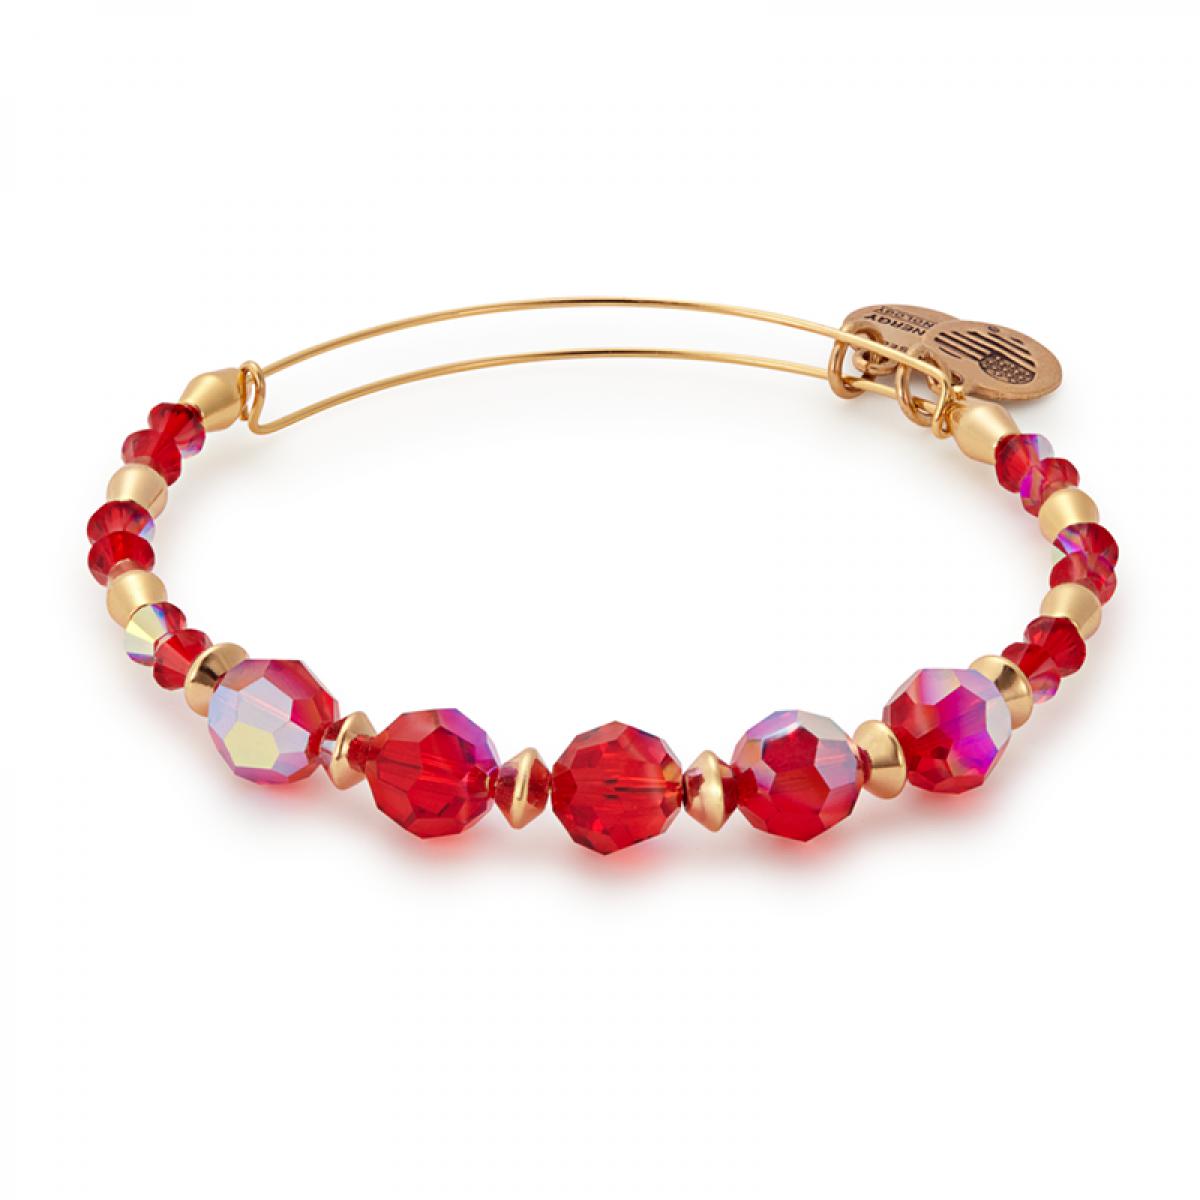 Lyst - Alex And Ani Poinsettia Beaded Bangle With Swarovski Crystals